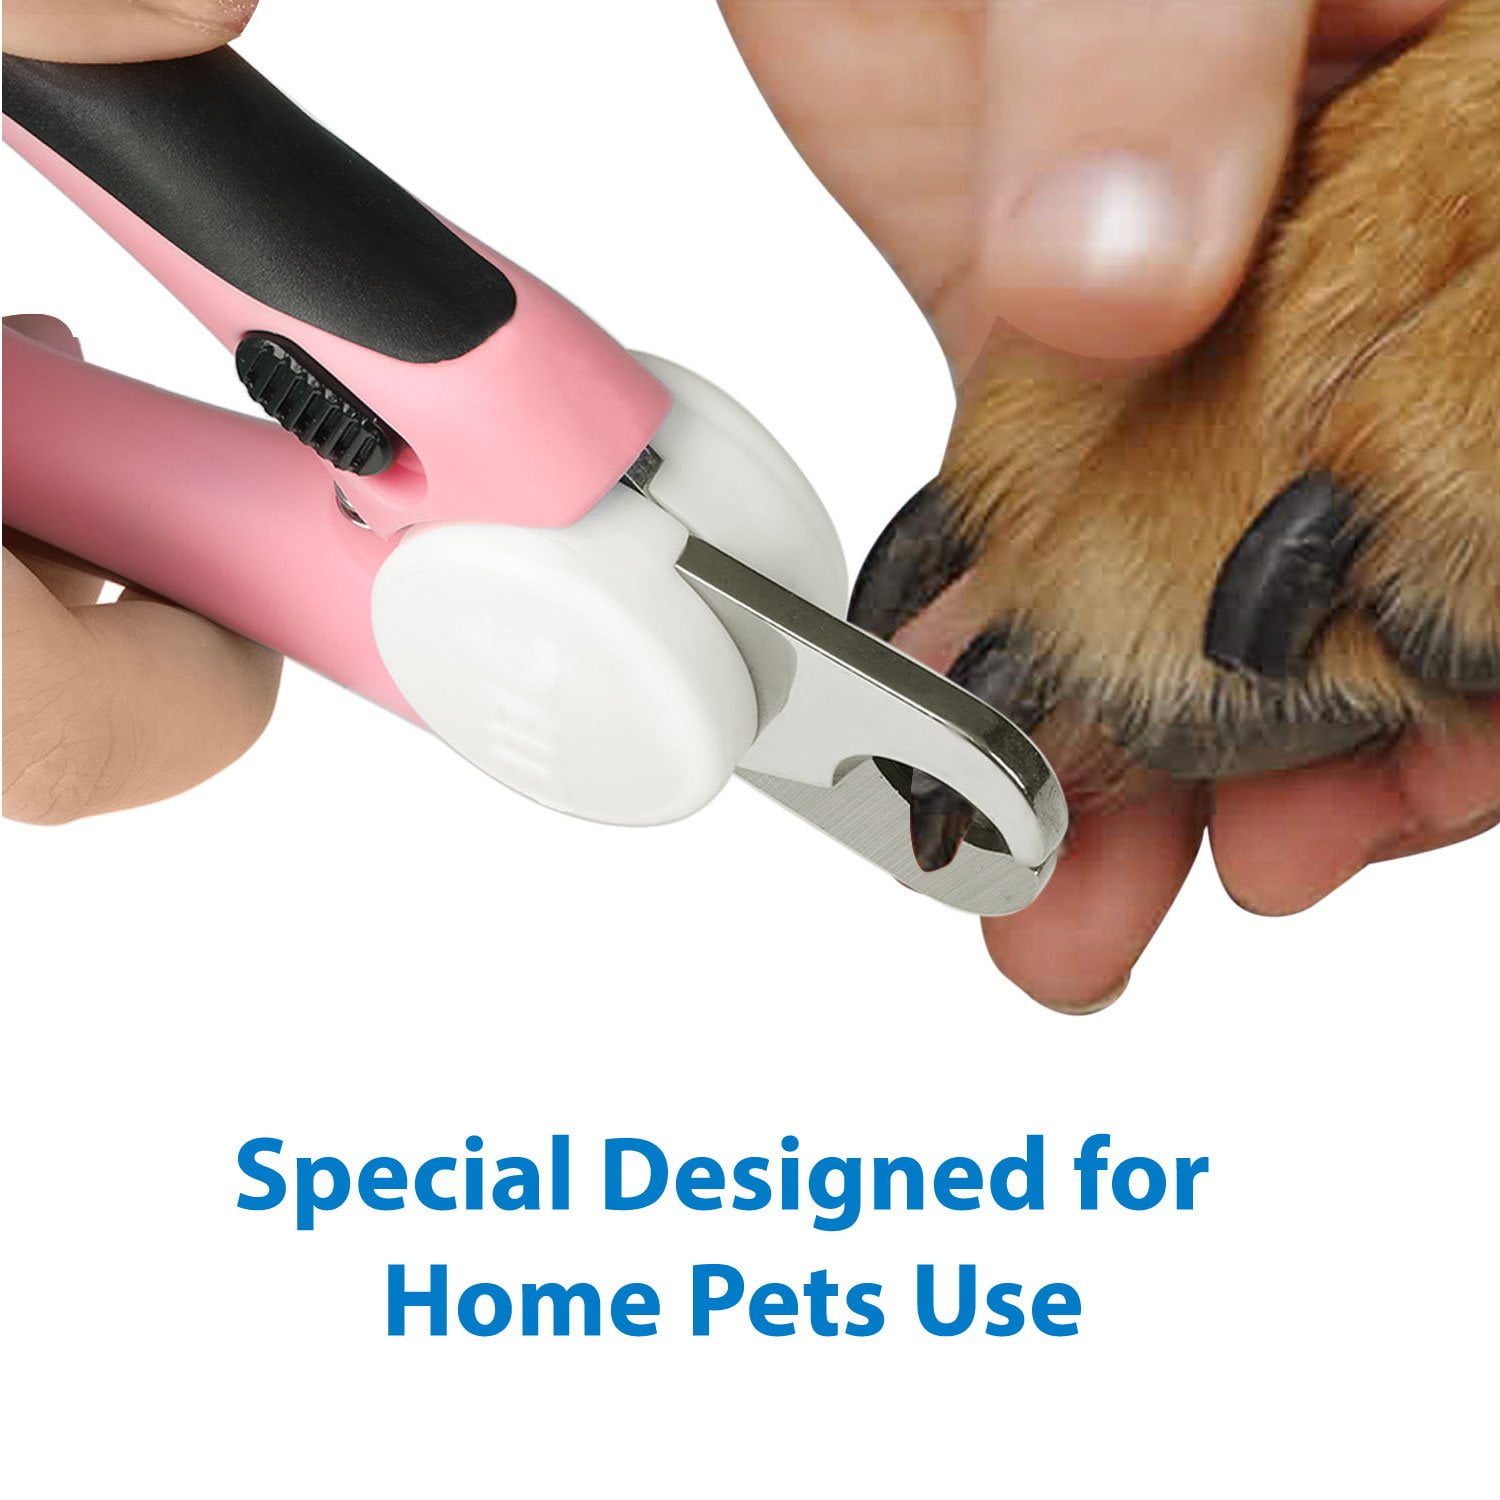 dog nail clippers with quick sensor